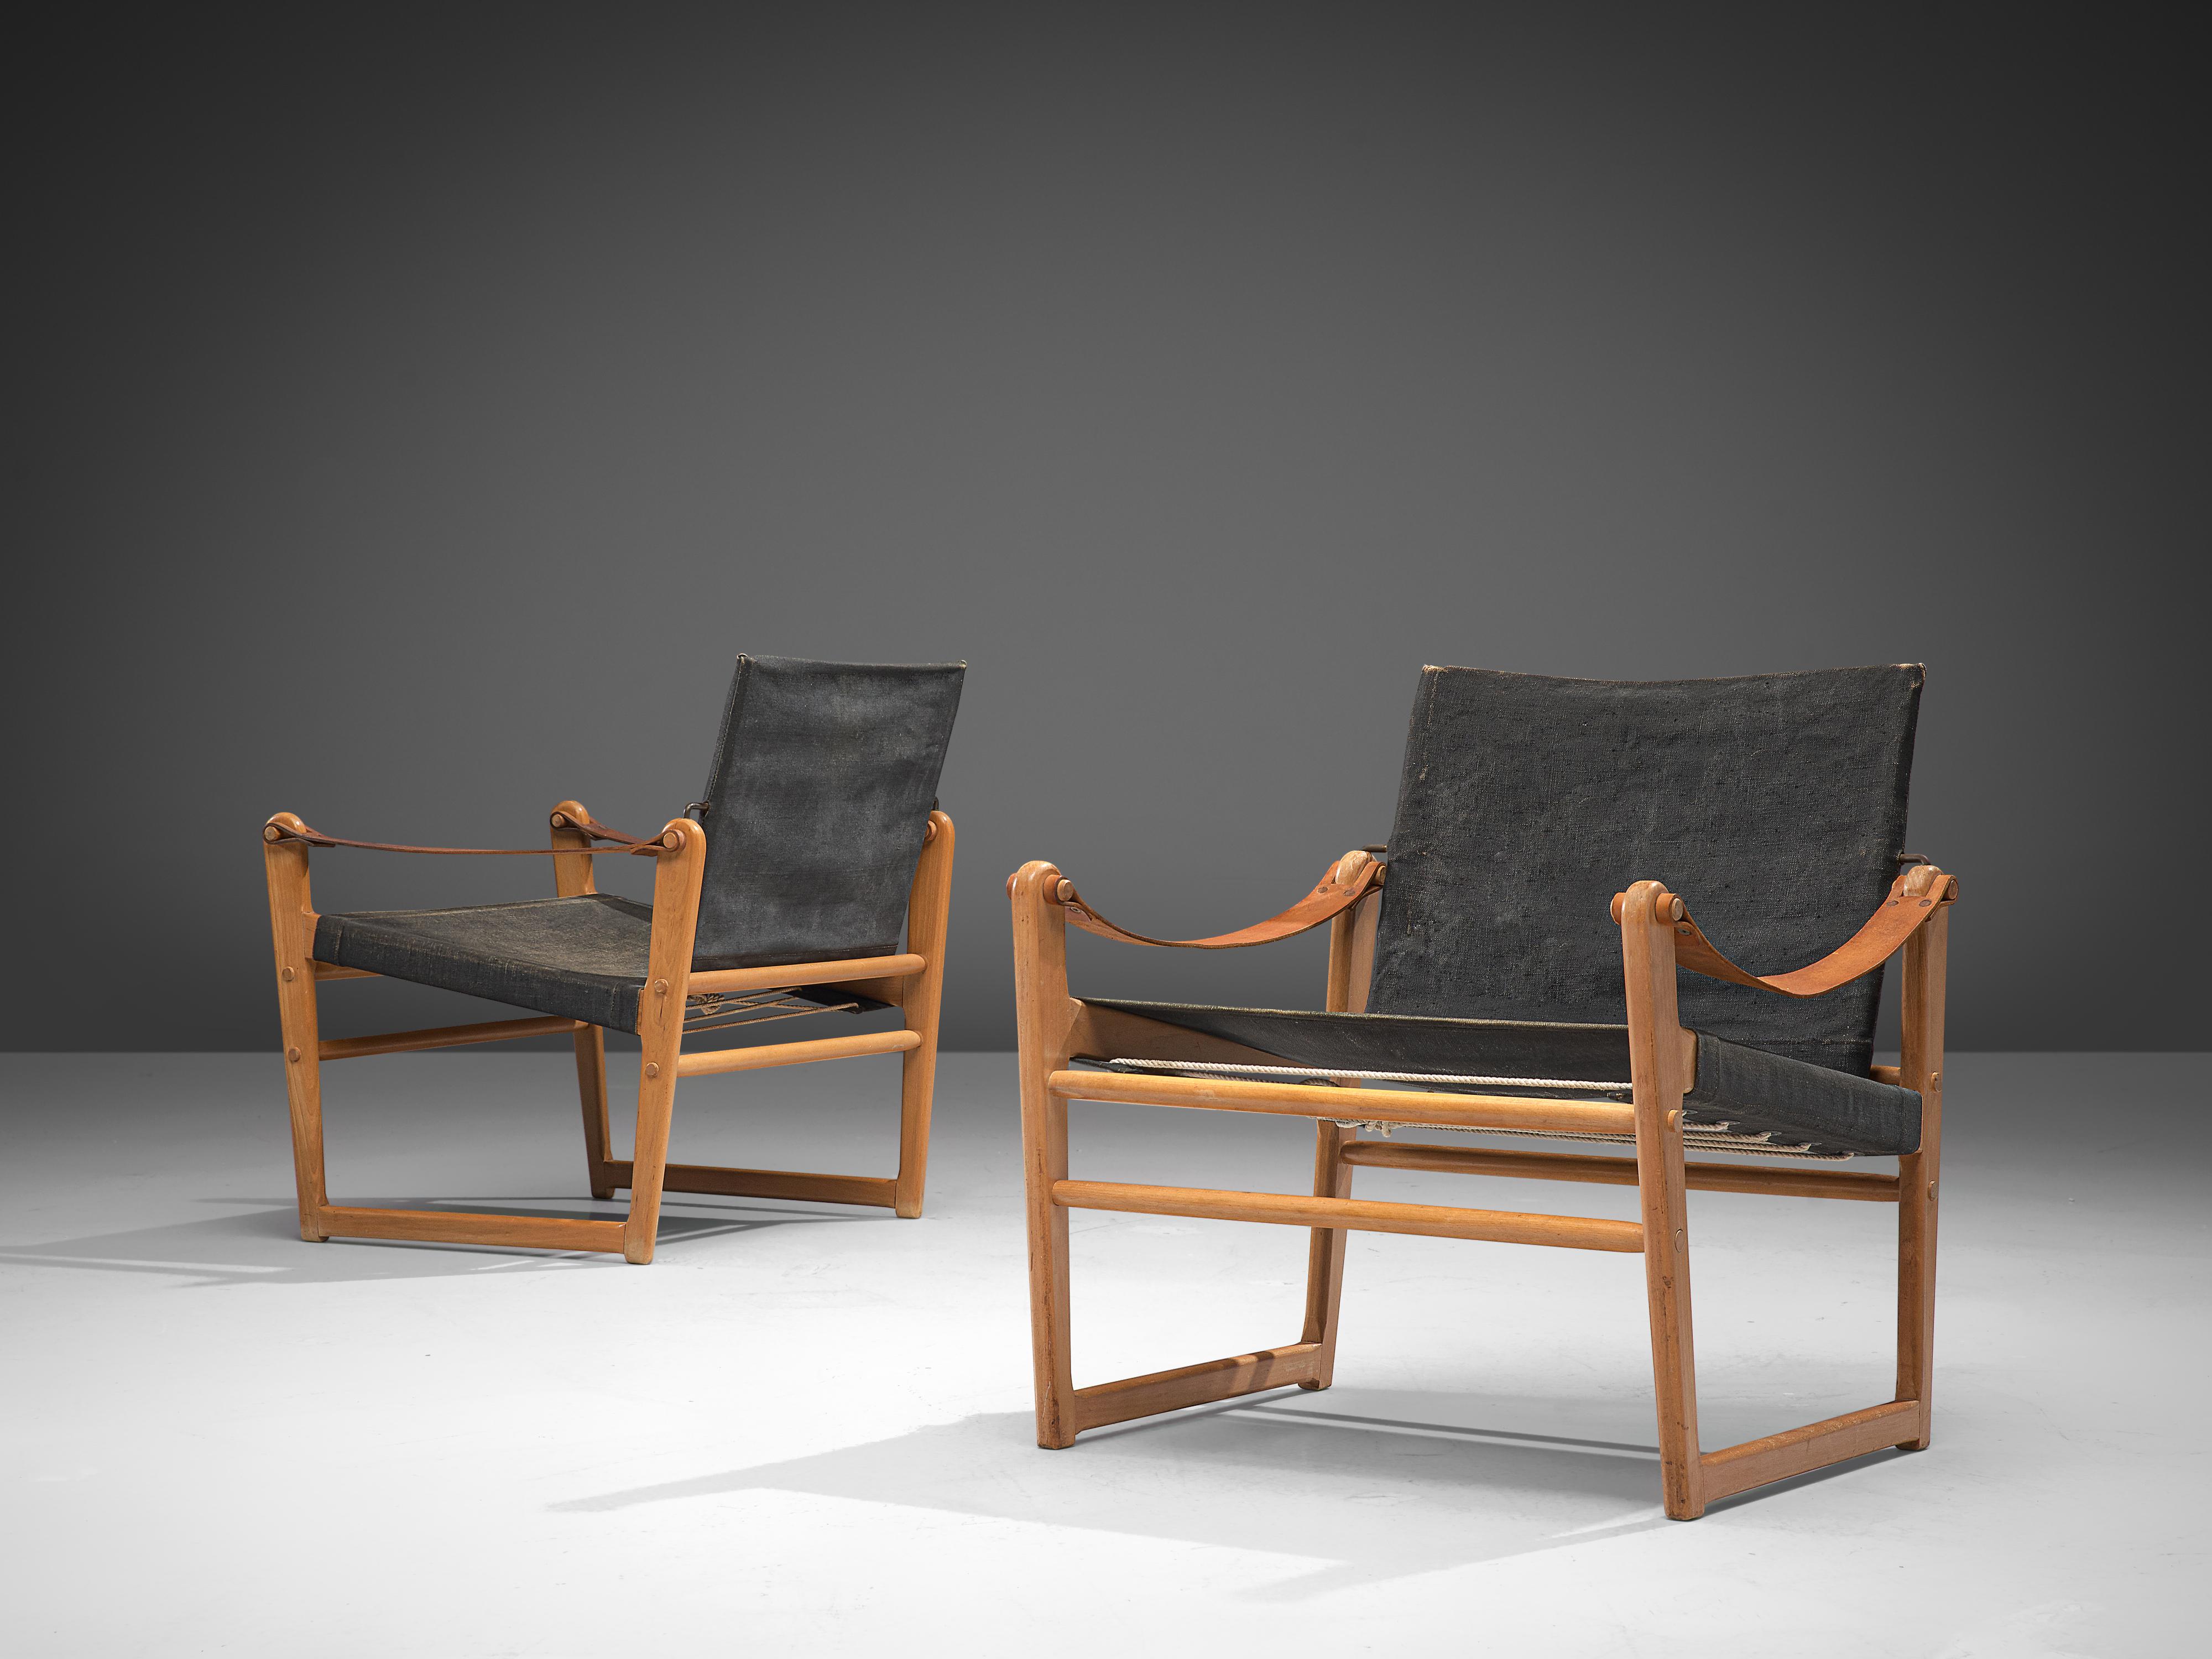 Bengt Ruda, pair of 'Cikida' safari chairs, canvas, beech, leather, Sweden, 1960s

A lovely pair of safari chairs in a rare combination of the natural materials. A frame in beech is equipped with armrests in cognac leather. Seat and backrest are